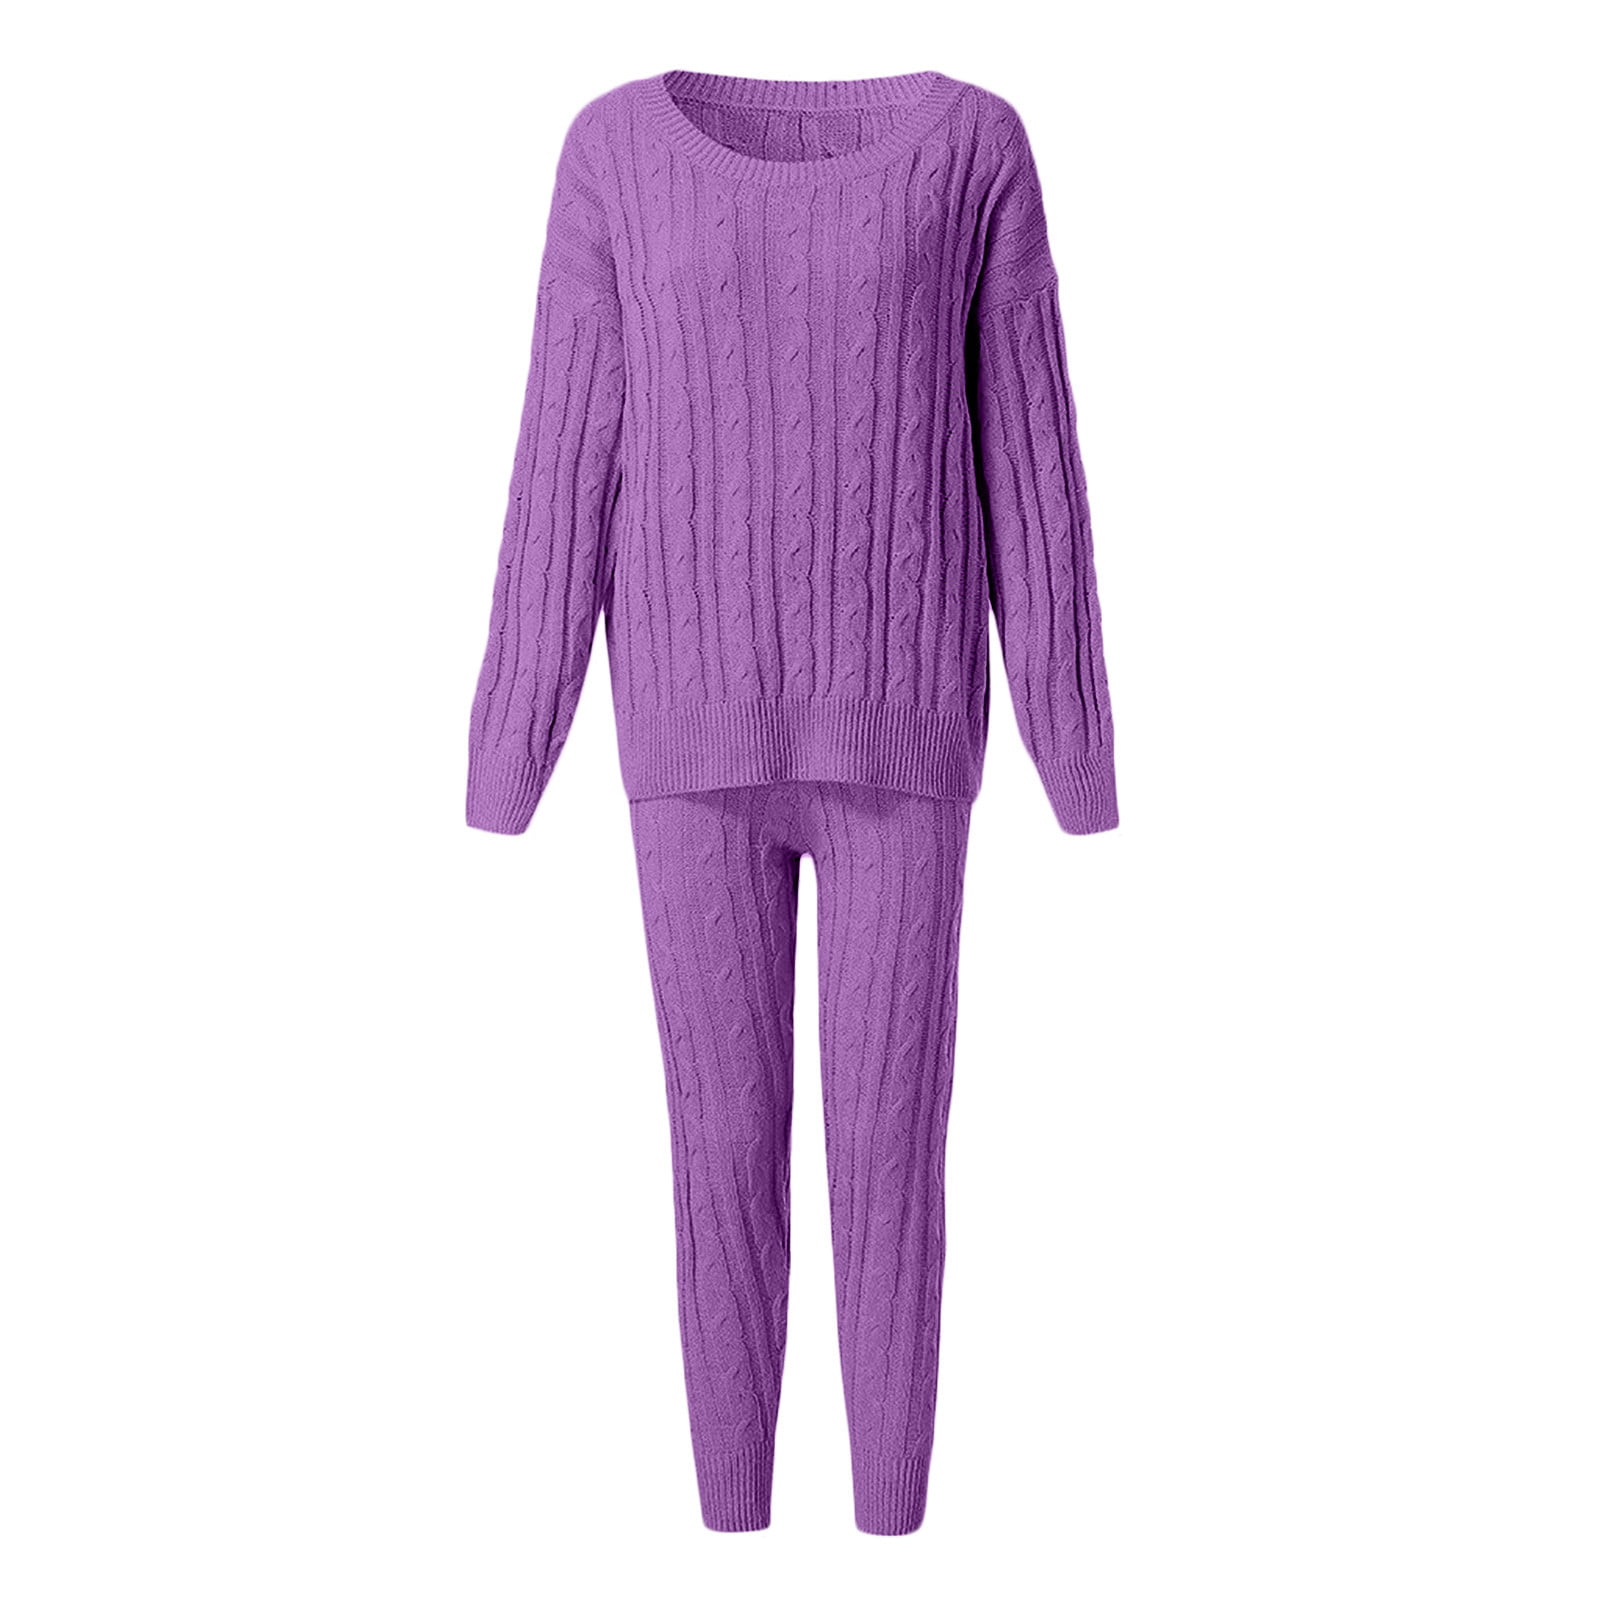 UTTOASFAY Plus Size Long Long Cable Womens Shoulder Women Picks Two-Piece Warm Flash 18(Xxxxxl) Knitted Sweater Color Solid Sleeve Pants Set off Purple Pants Suit Clearance